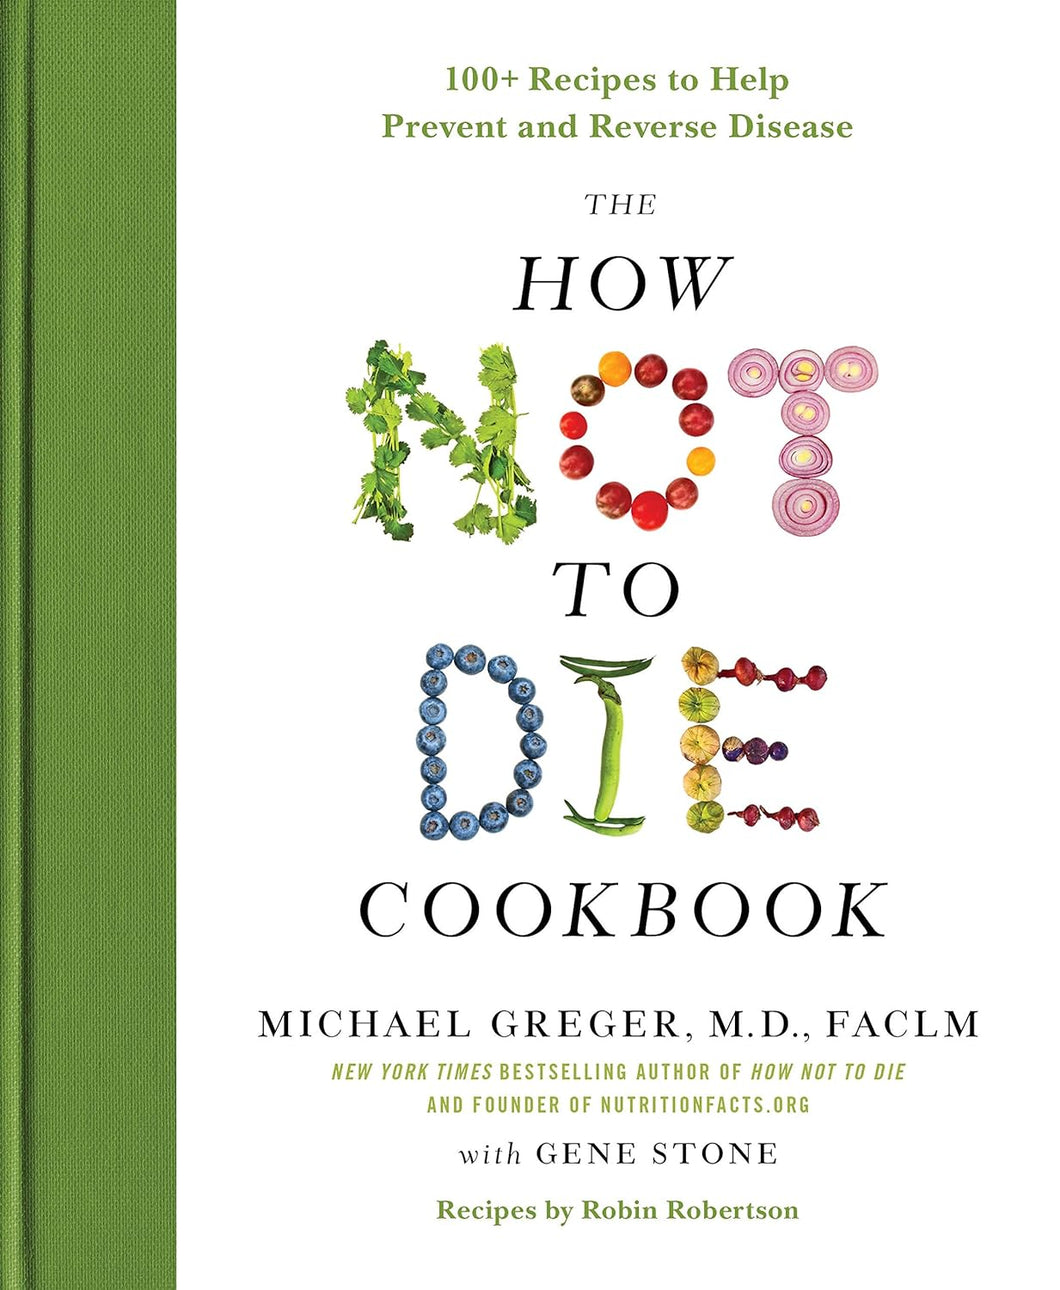 The How Not To Die Cookbook: 100+ Recipes To Help Prevent And Reverse Disease [Michael Greger]